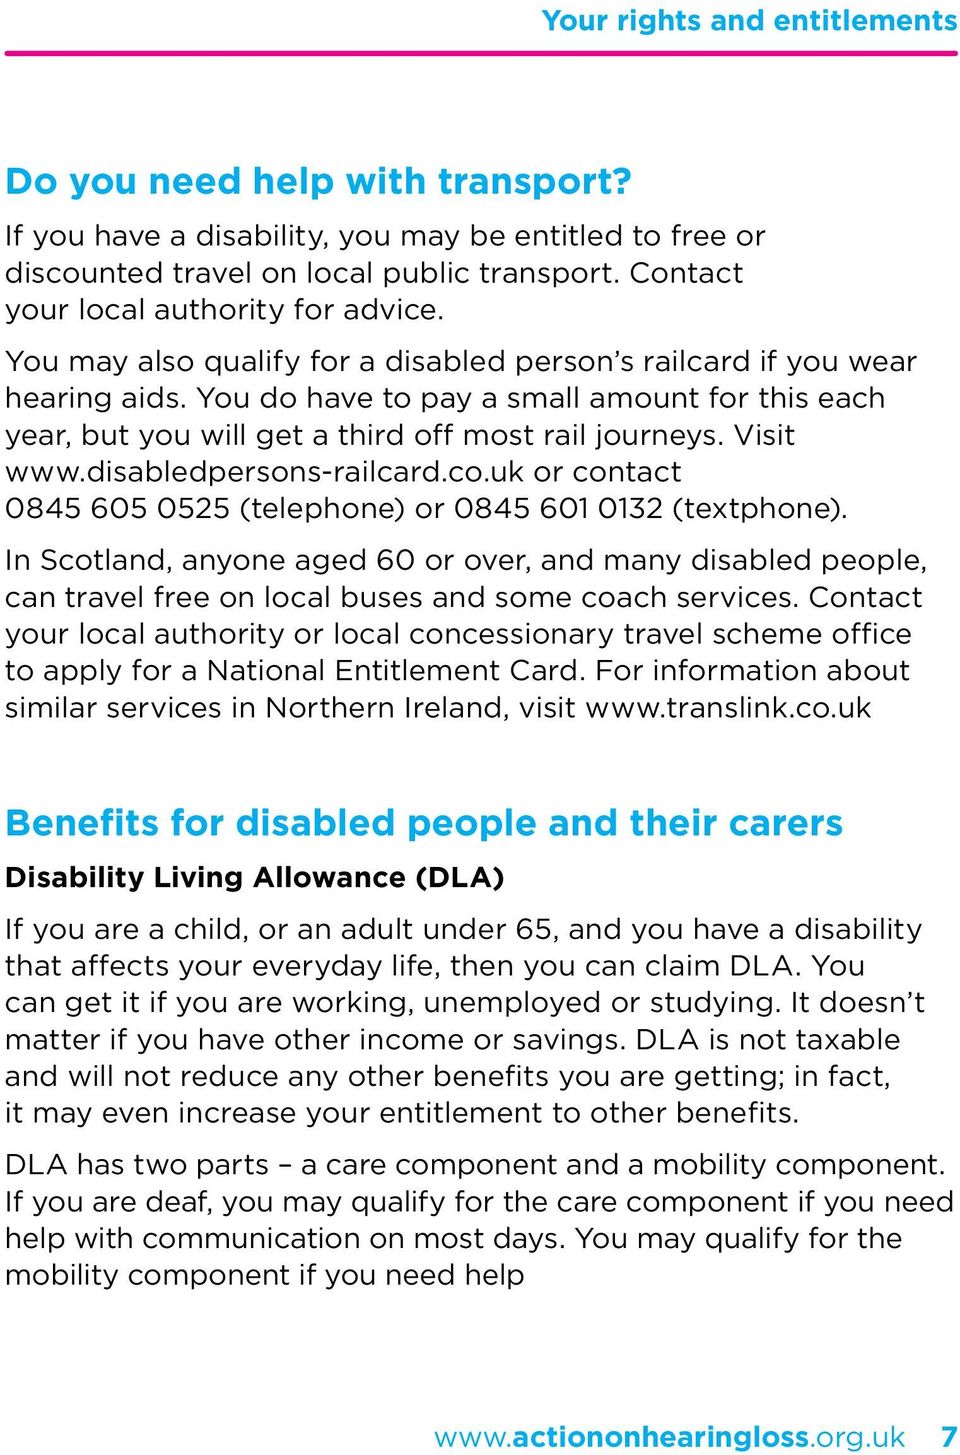 disabledpersons-railcard.co.uk or contact 0845 605 0525 (telephone) or 0845 601 0132 (textphone).